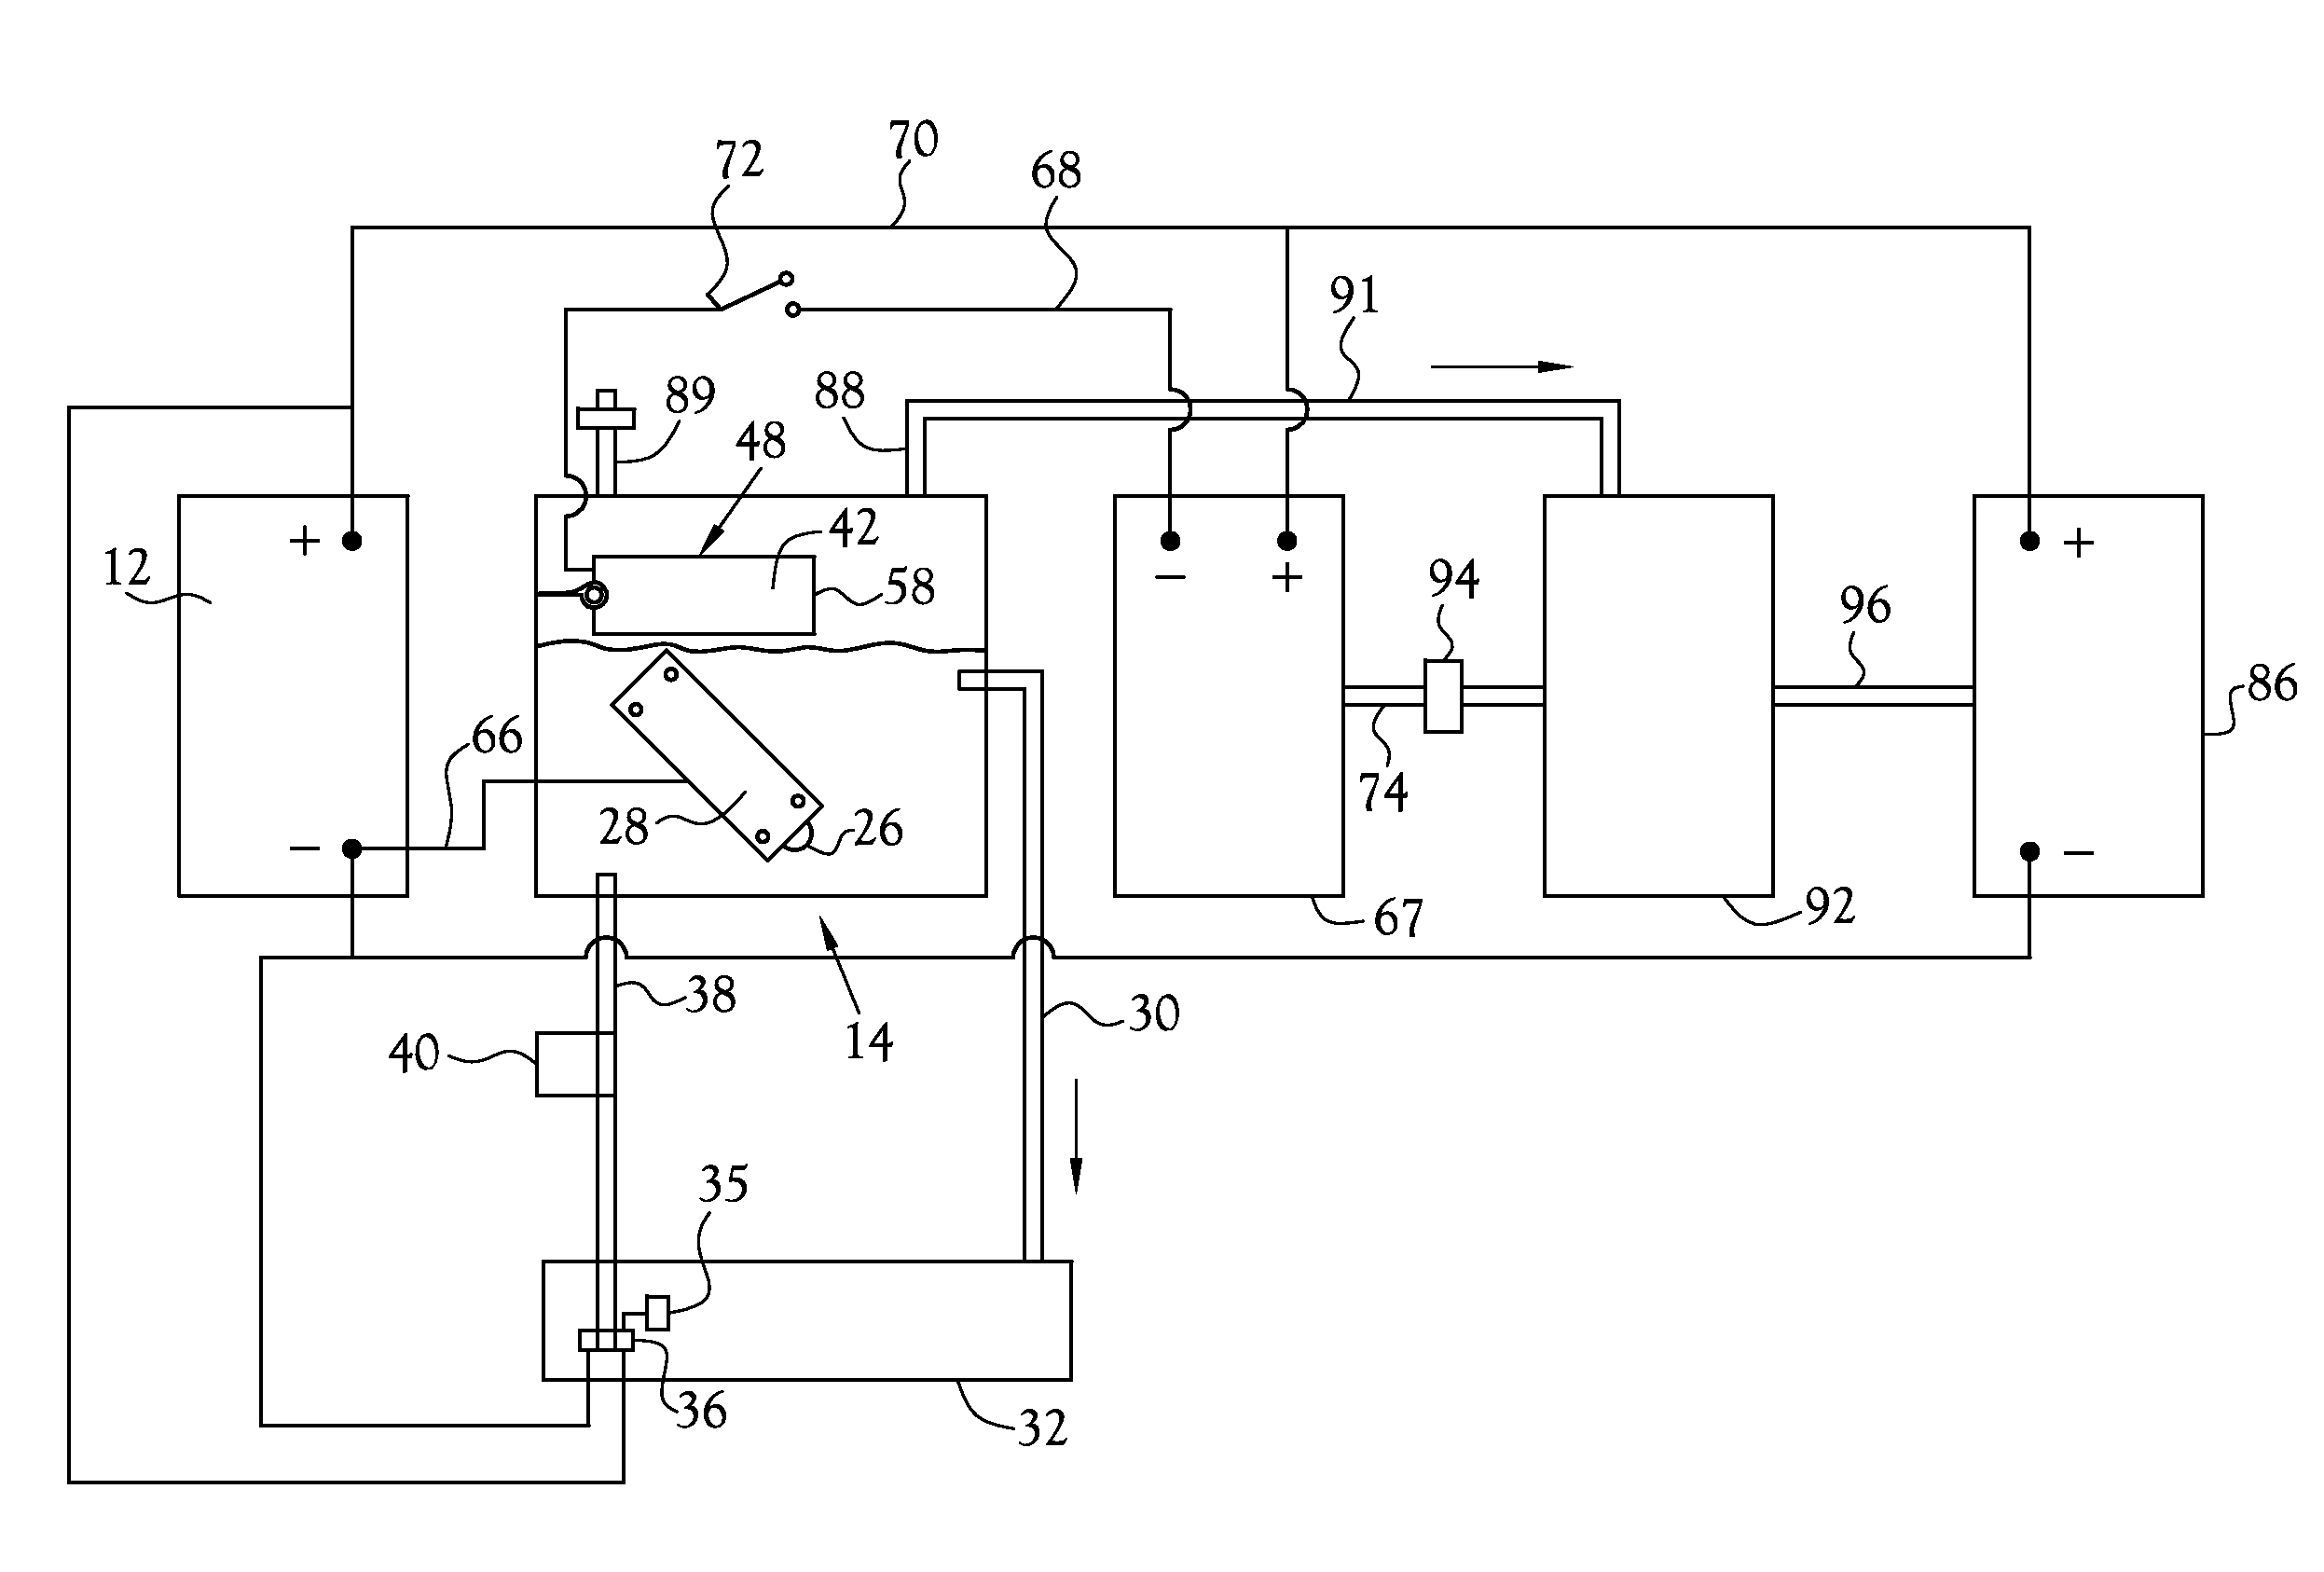 Method and Apparatus for Controlling an Electric Motor and an Internal Combustion Engine